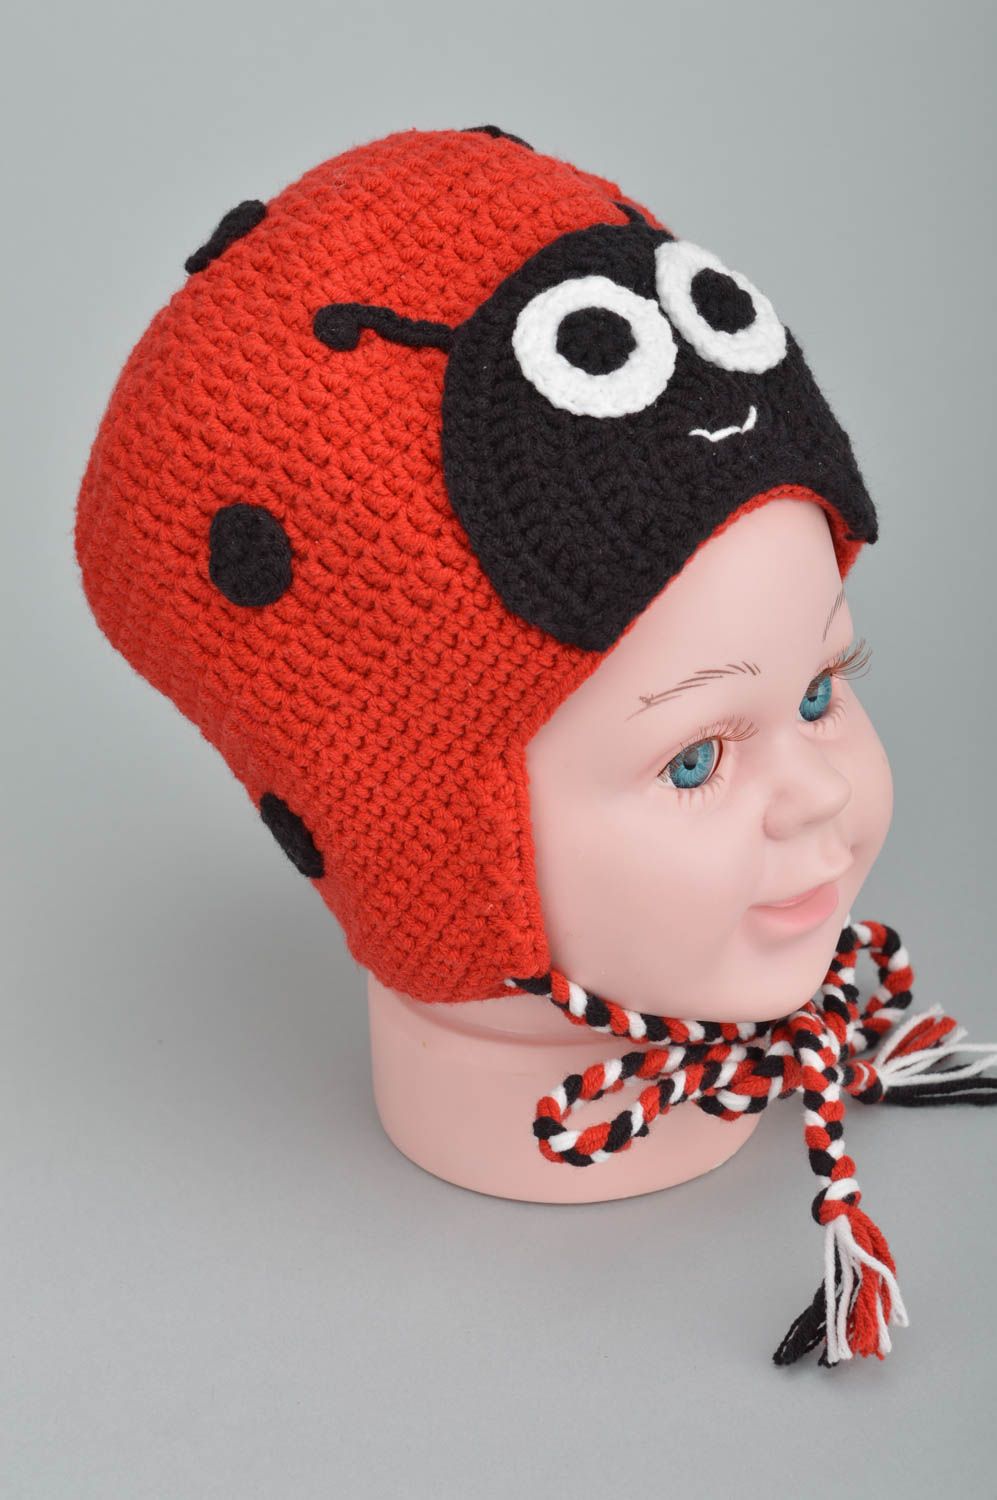 Handmade accessory crocheted hat ladybug cap red and black colors gift for girl photo 4